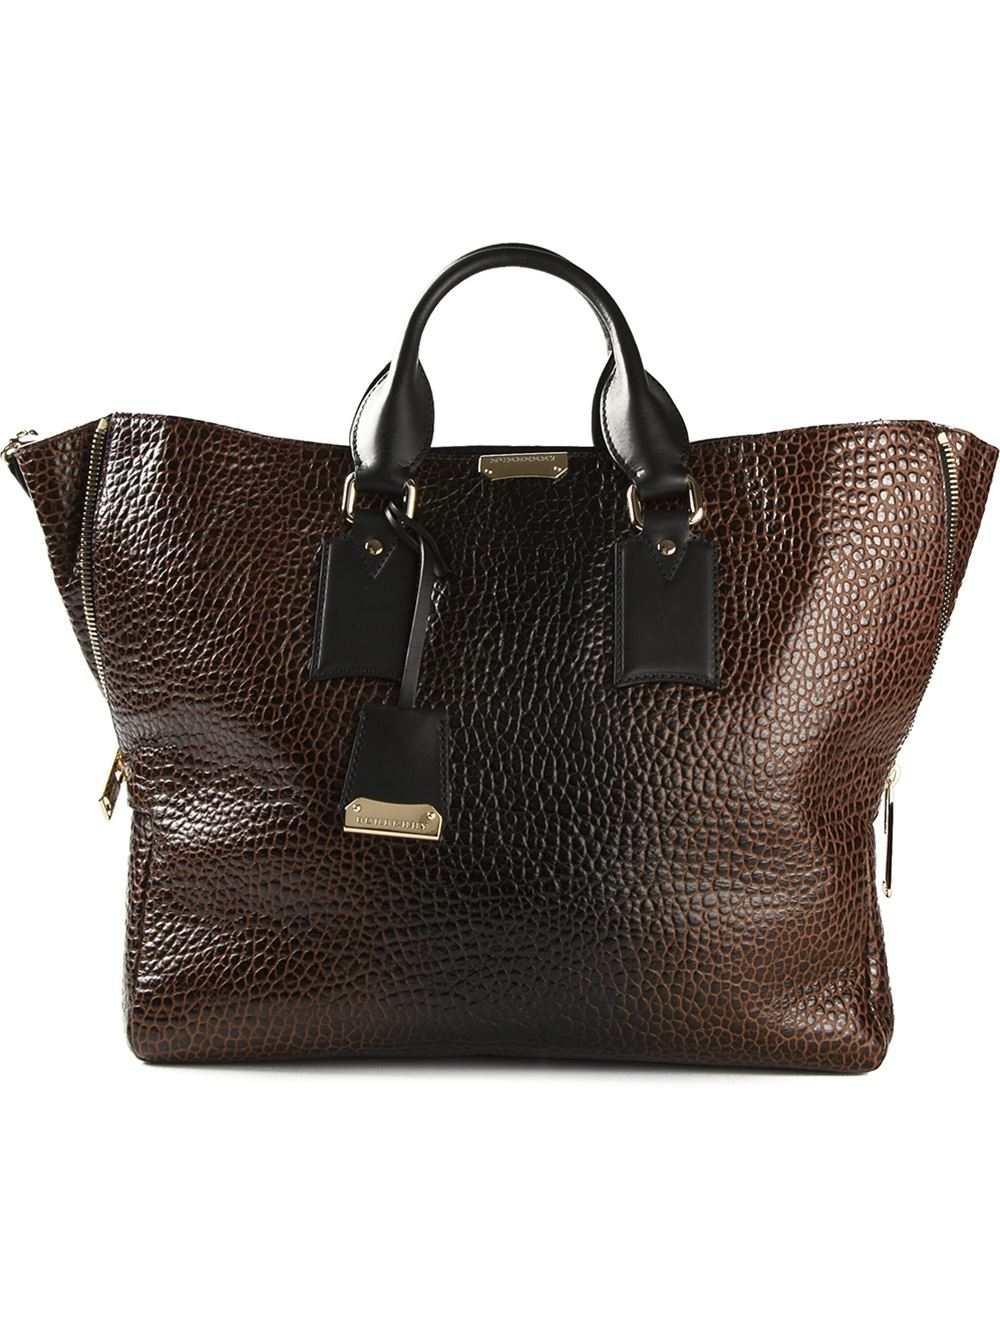 Lyst - Burberry Pebbled Tote Bag in Brown